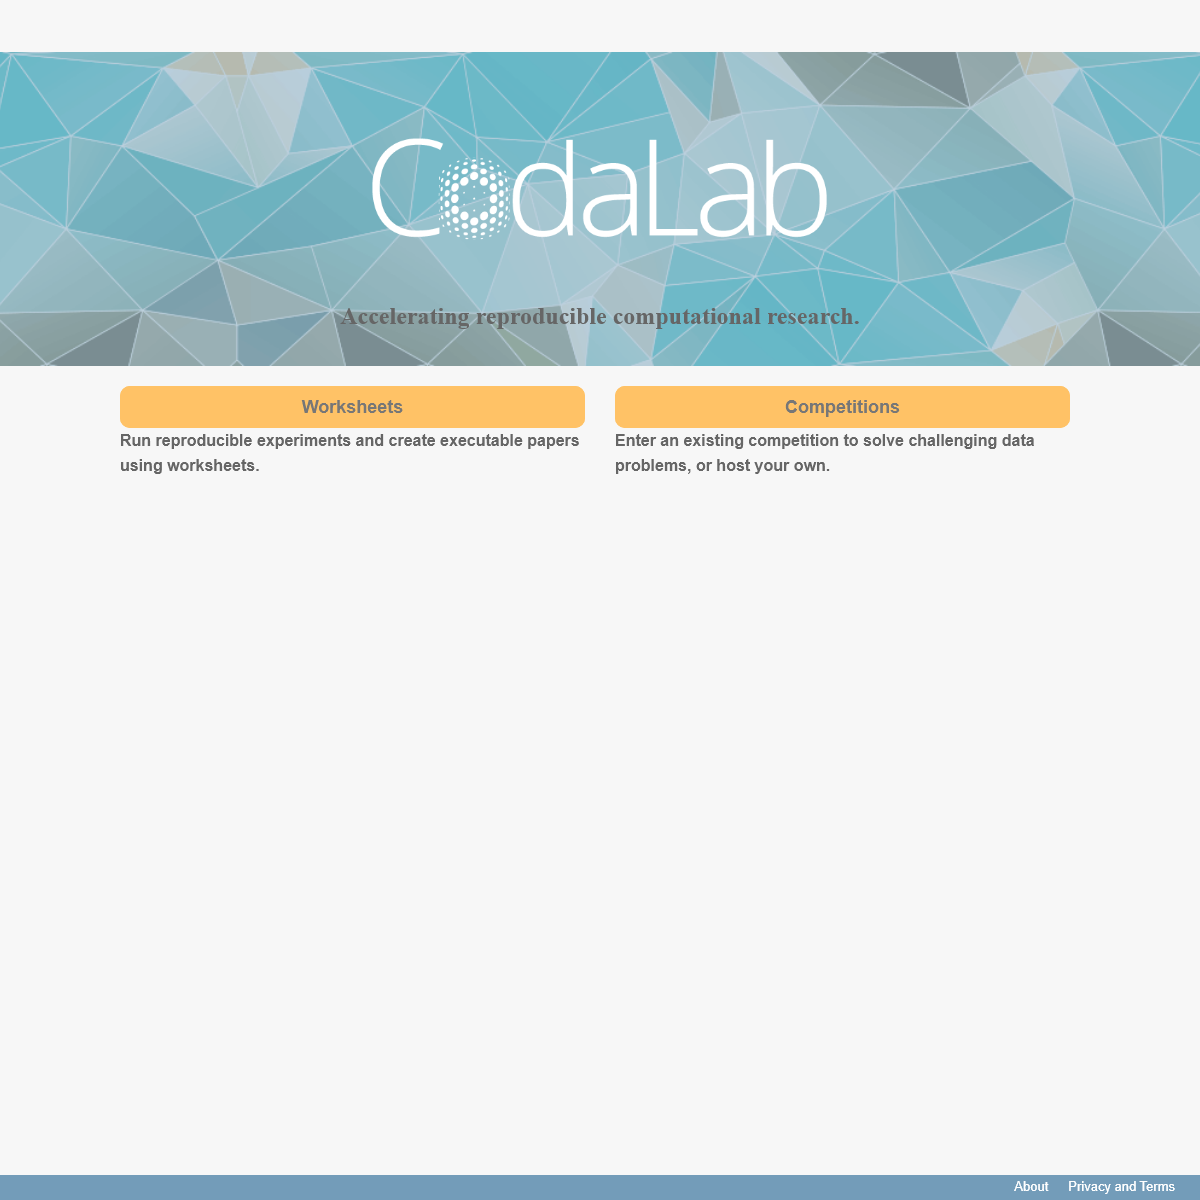 A complete backup of codalab.org